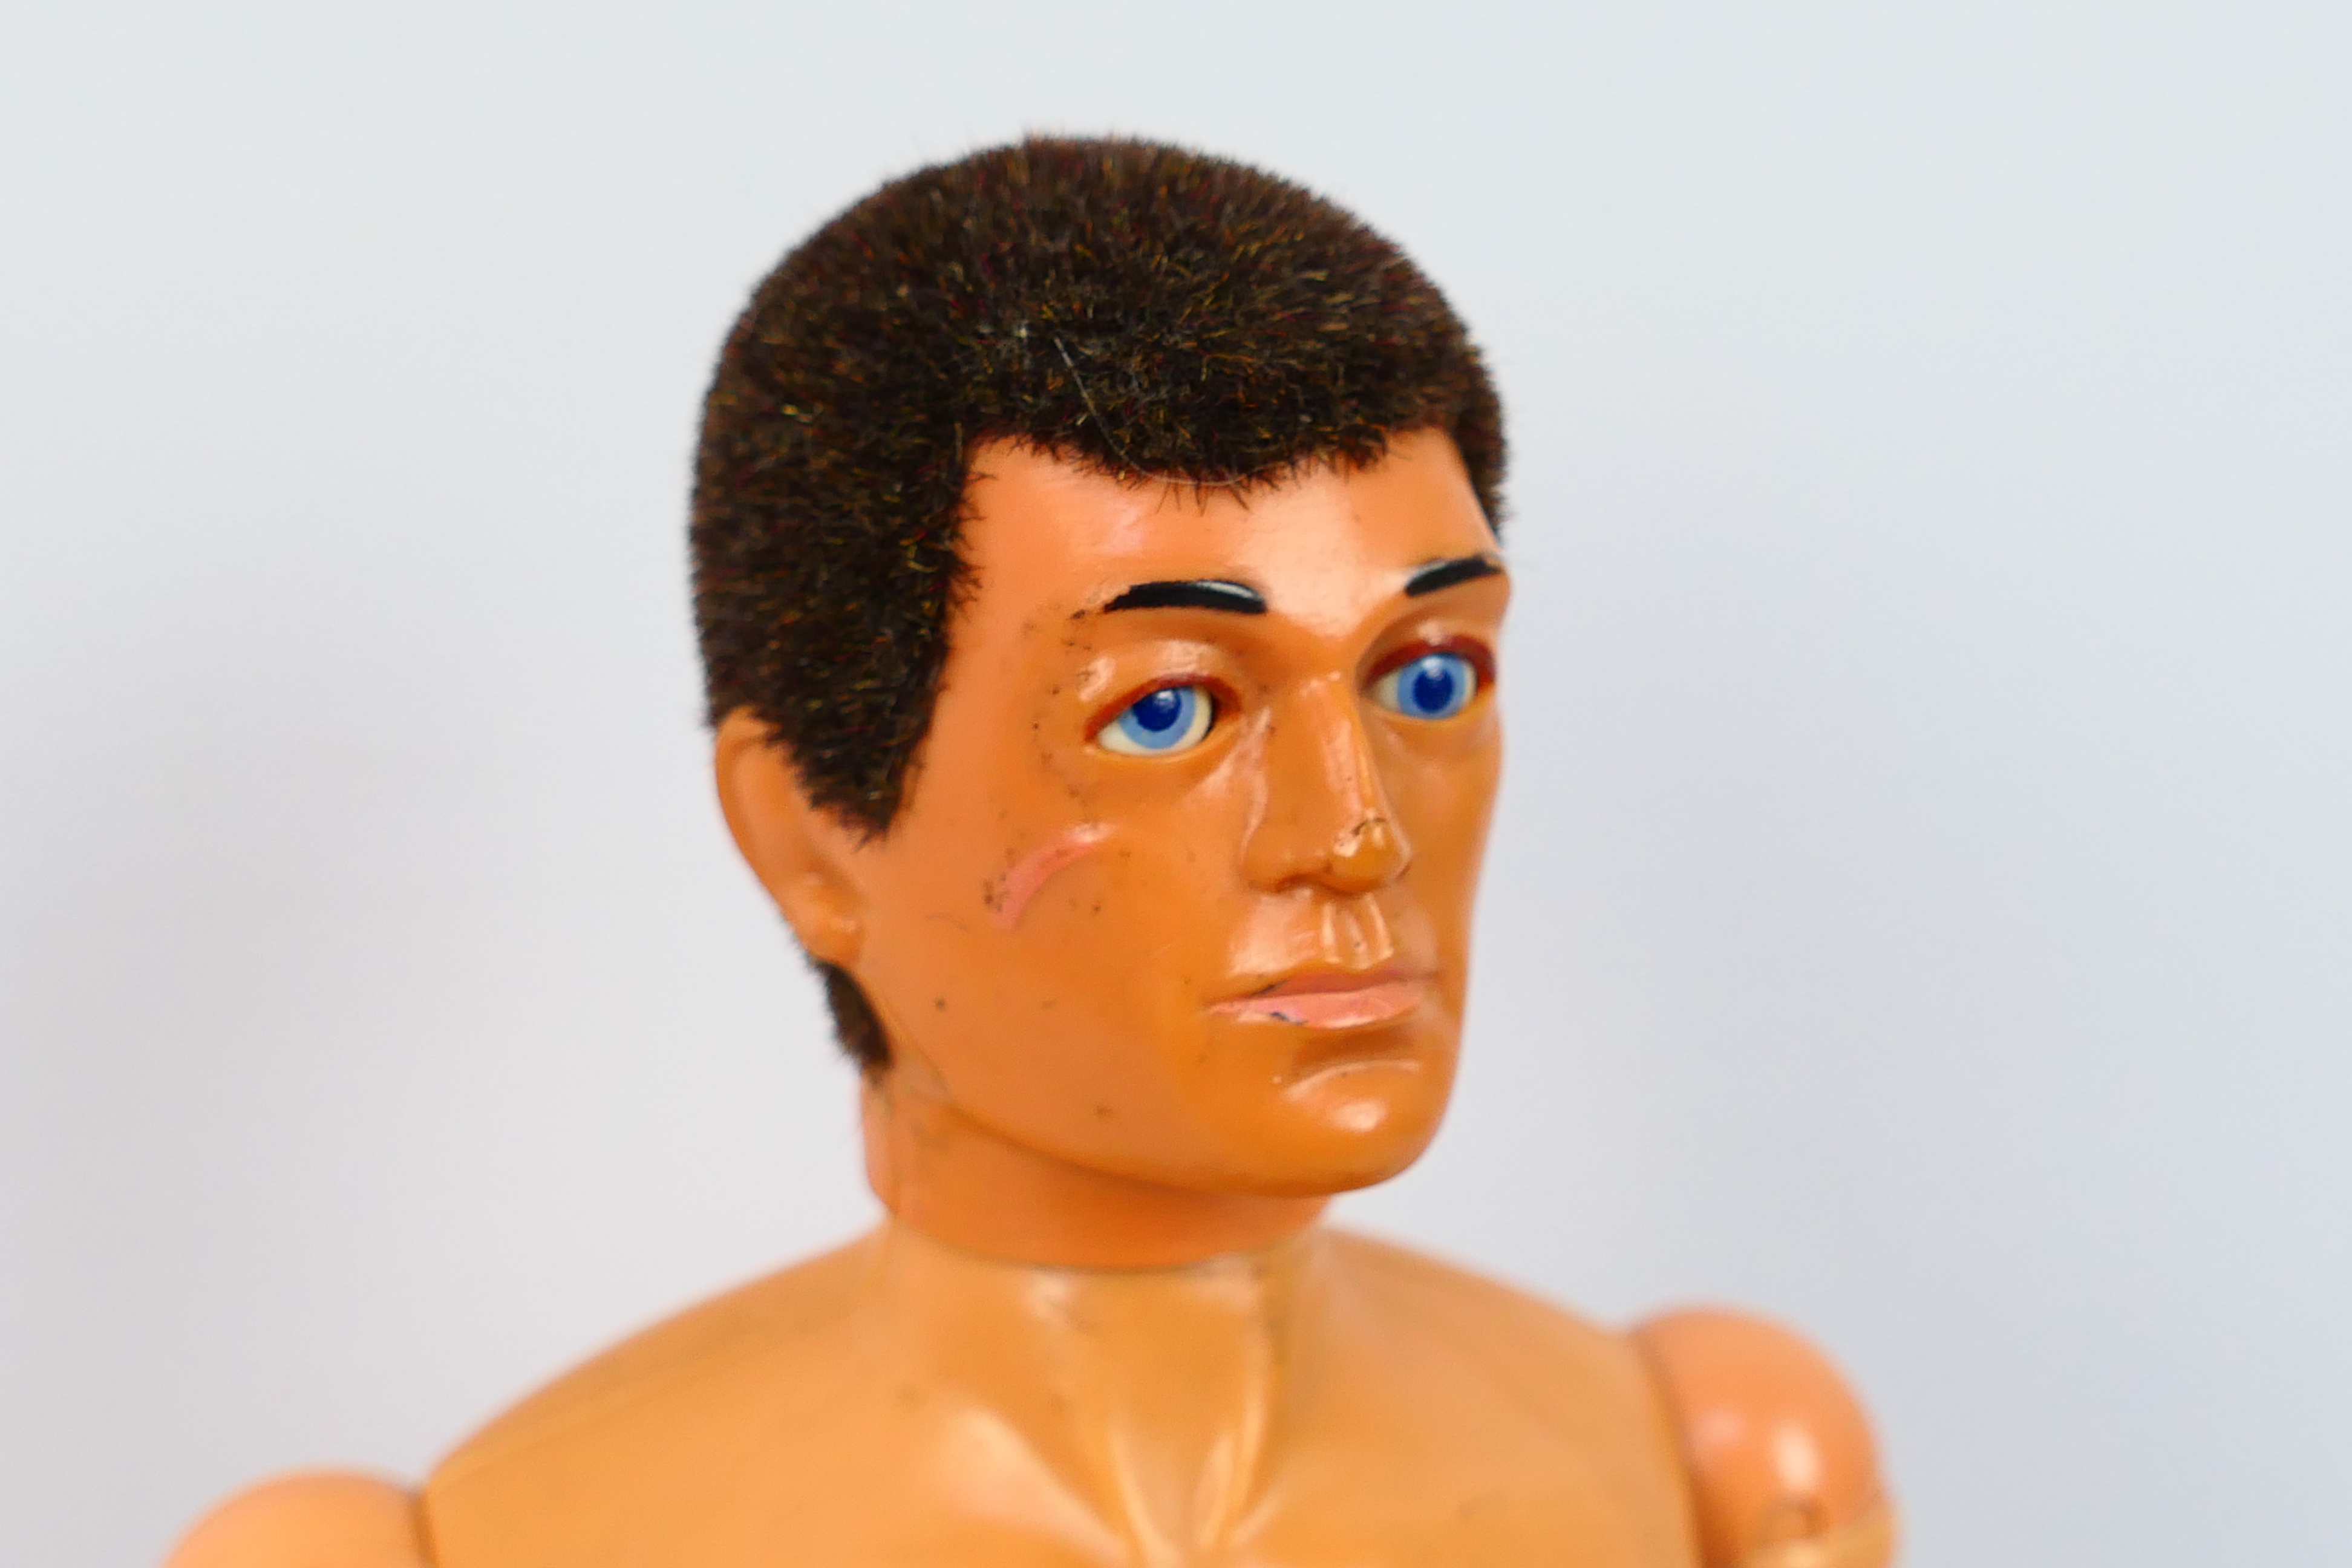 Palitoy - Action Man - An unboxed 1978 Action Man action figure with Flock hair and eagle eyes and - Image 5 of 12